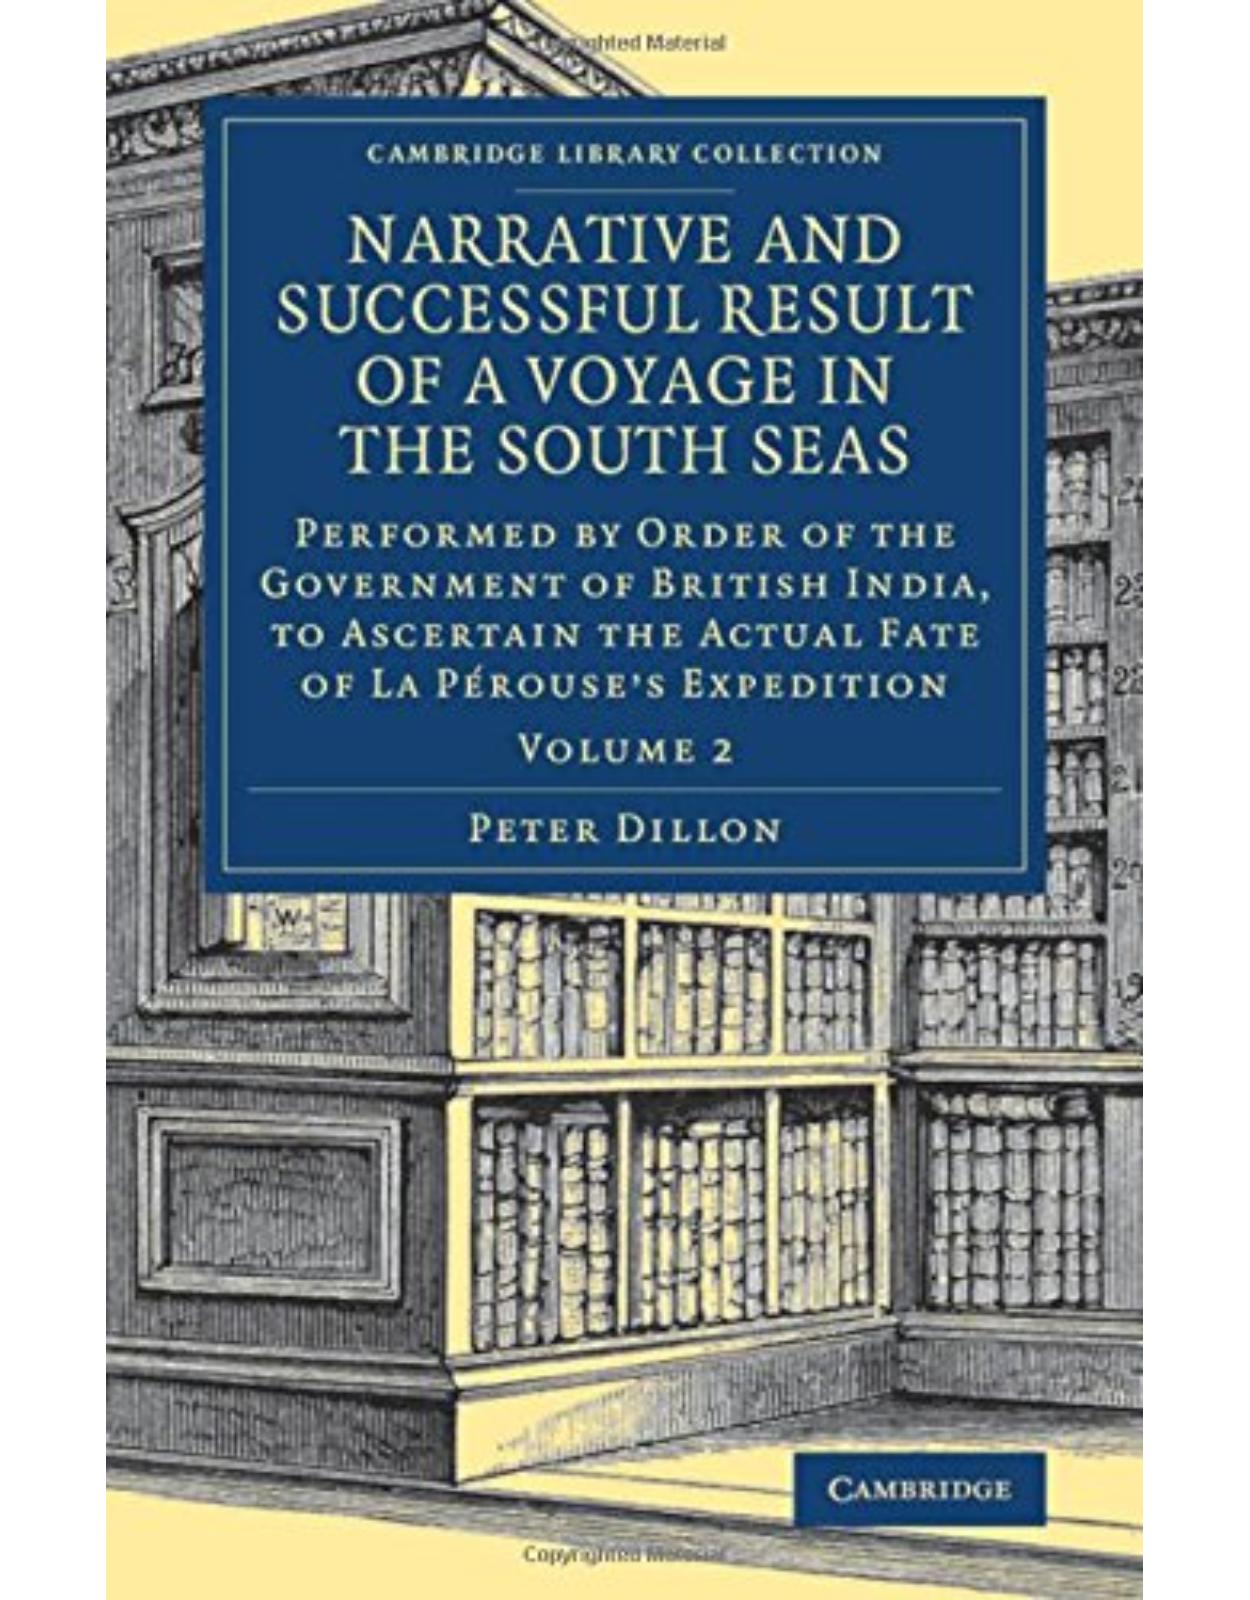 Narrative and Successful Result of a Voyage in the South Seas 2 Volume Set: Narrative and Successful Result of a Voyage in the South Seas: Performed ... Library Collection - Maritime Exploration)